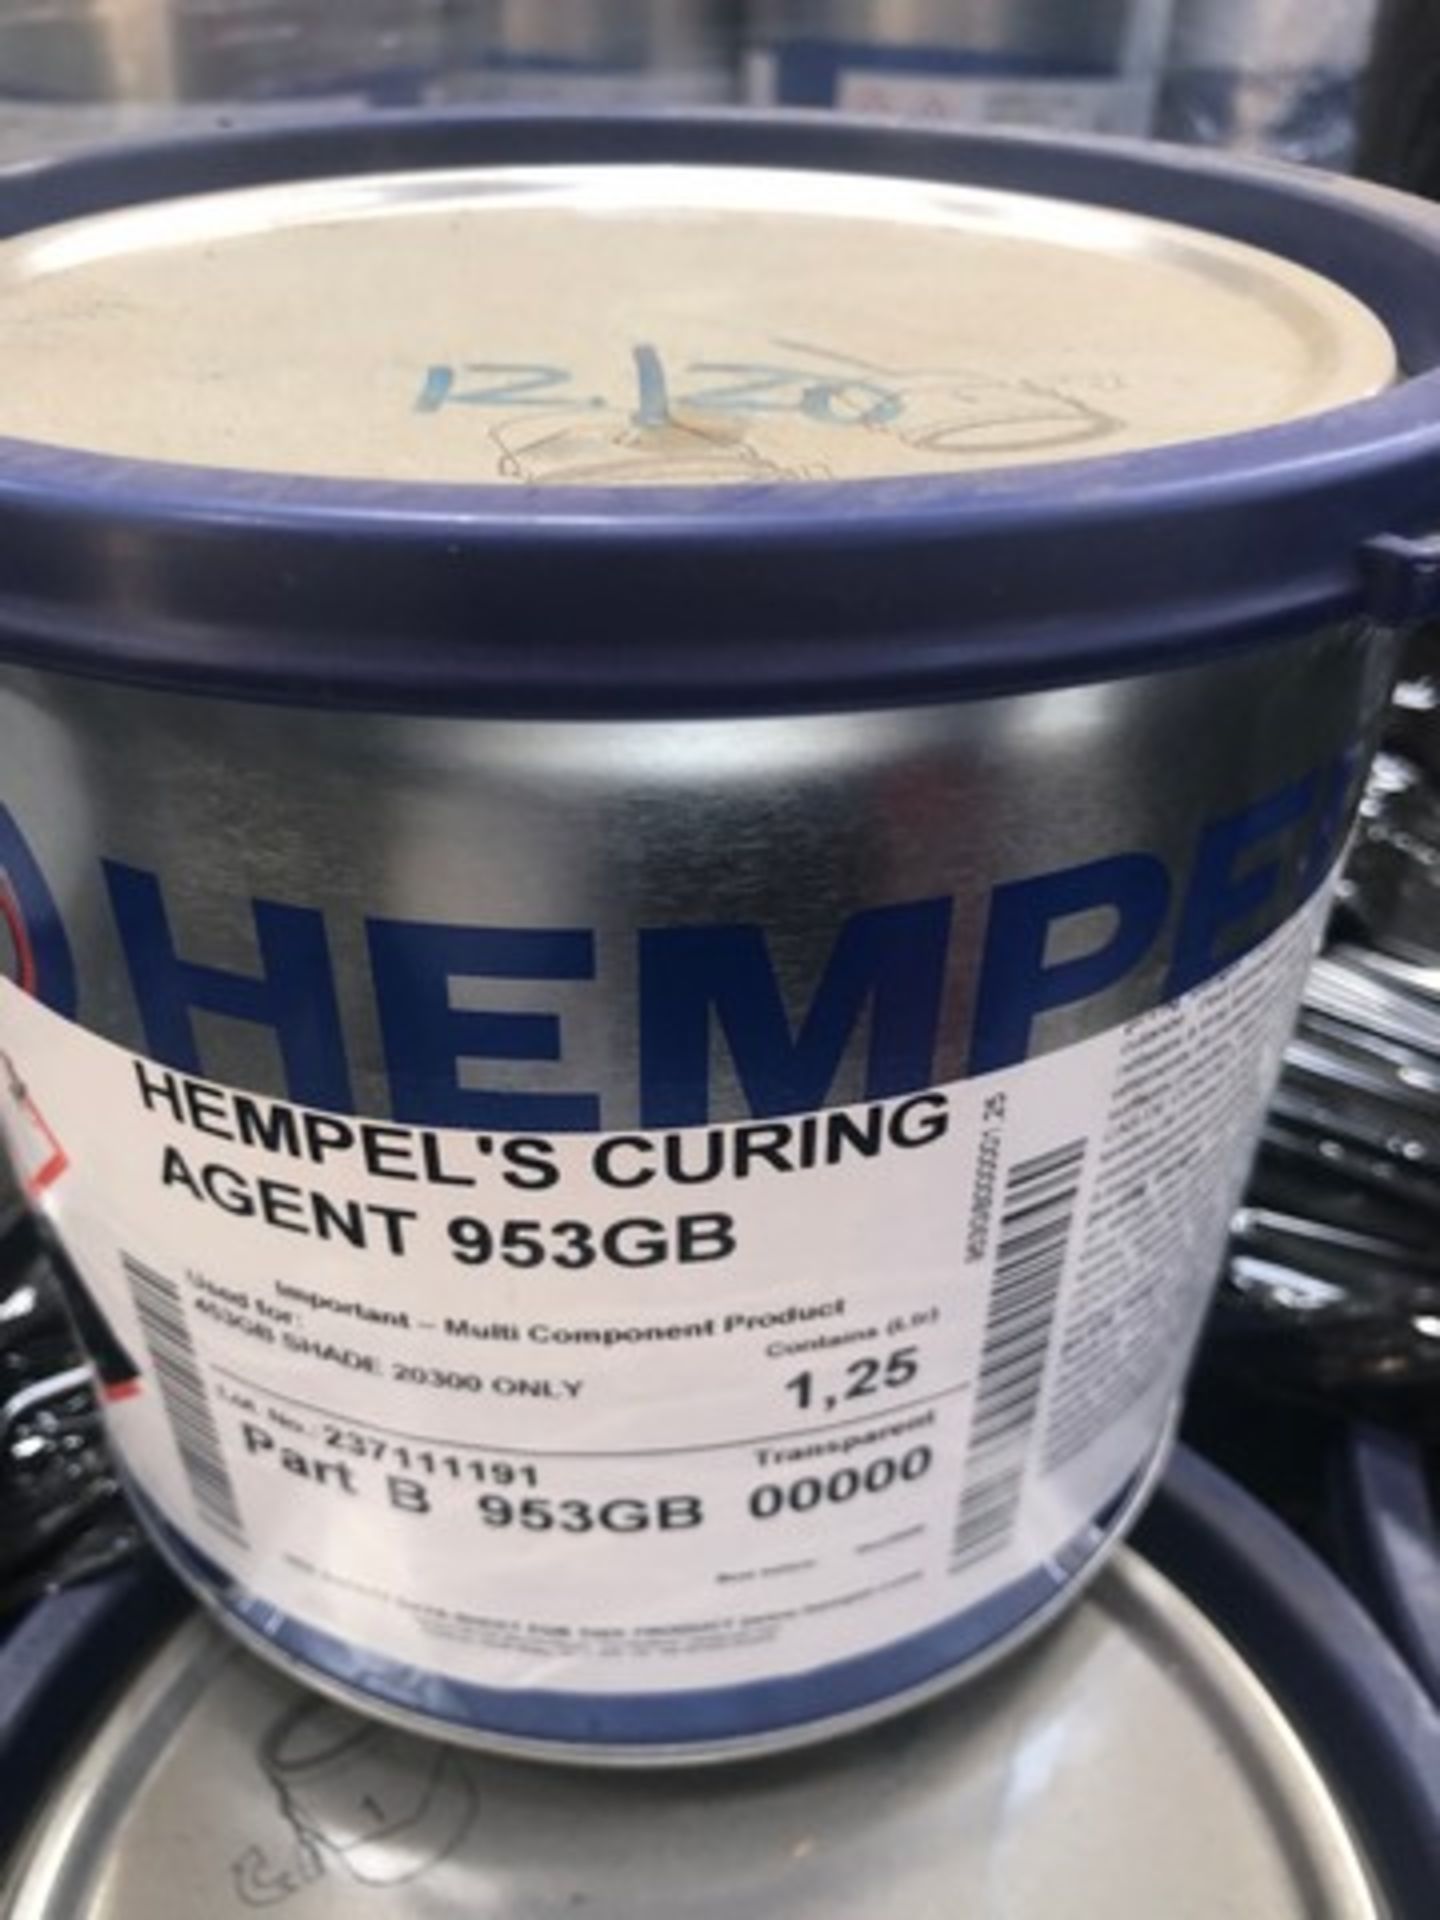 Pallet of Hempel curing agent 953GB approx 45 tins - Image 3 of 3